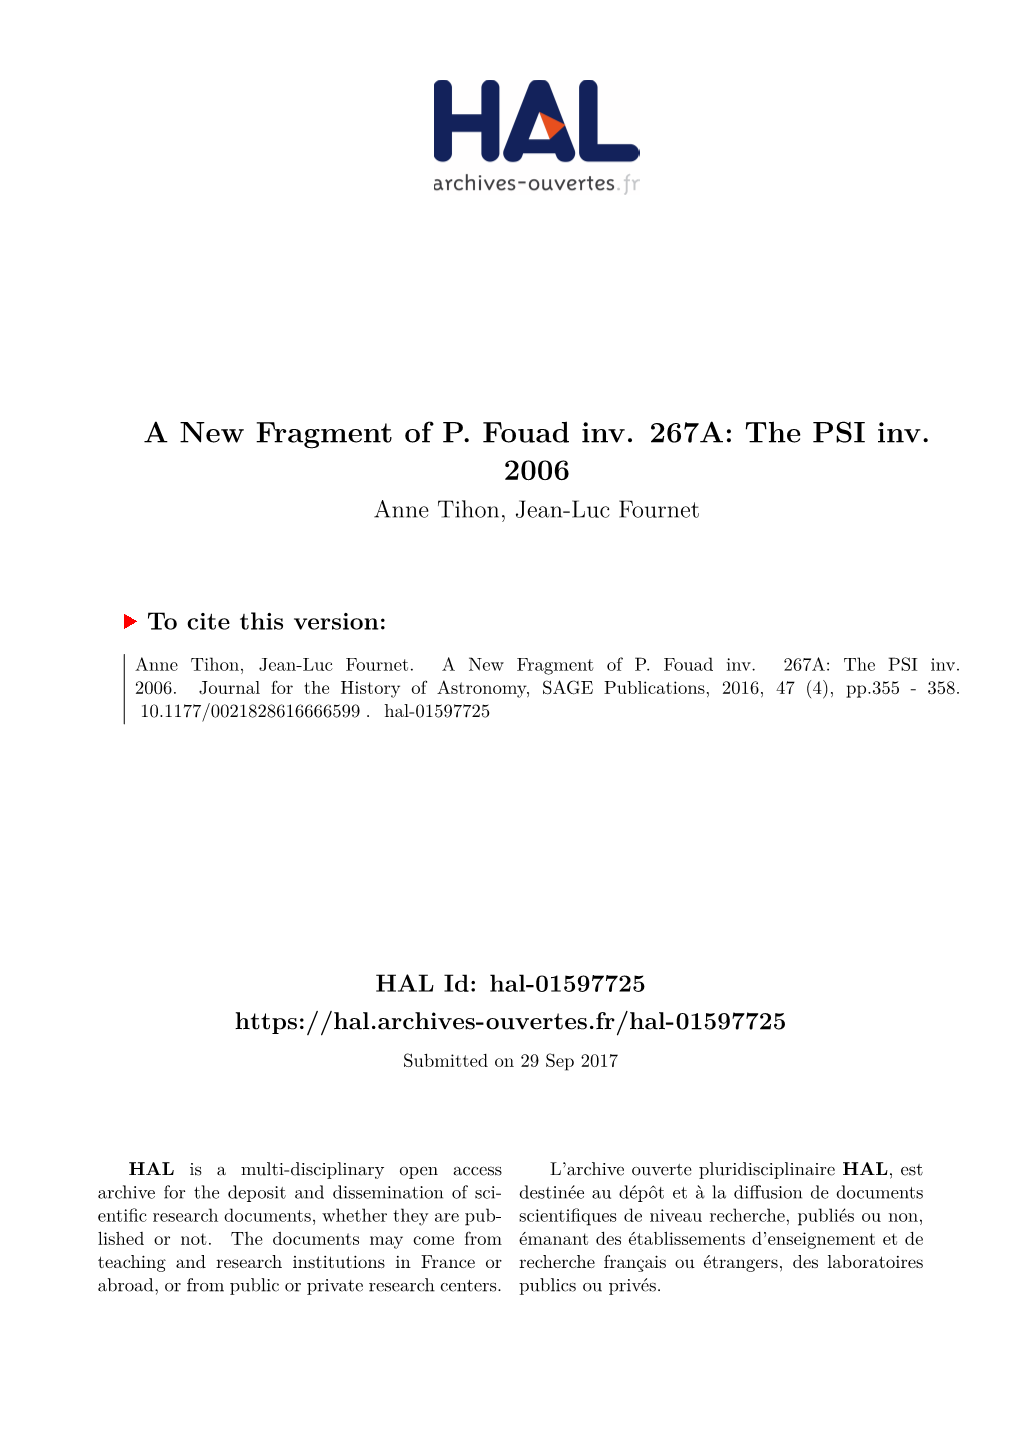 A New Fragment of P. Fouad Inv. 267A: the PSI Inv